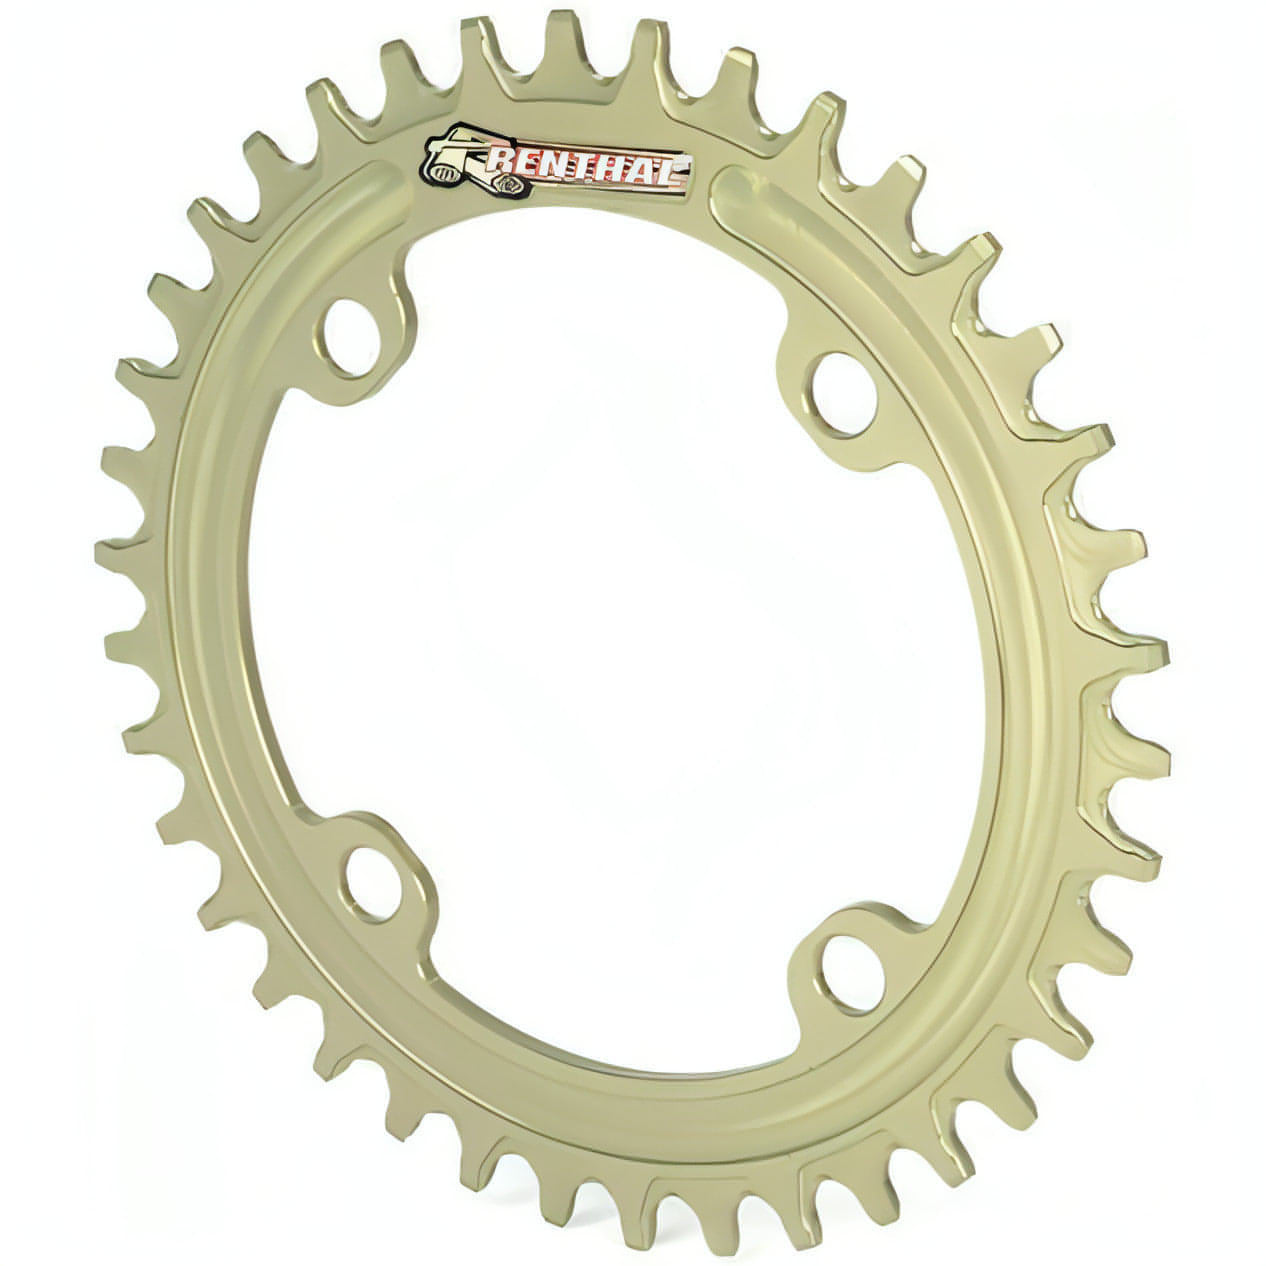 Renthal 1XR 4-Arm 104BCD Chainring 30T - Gold 5026190152034 - Start Fitness